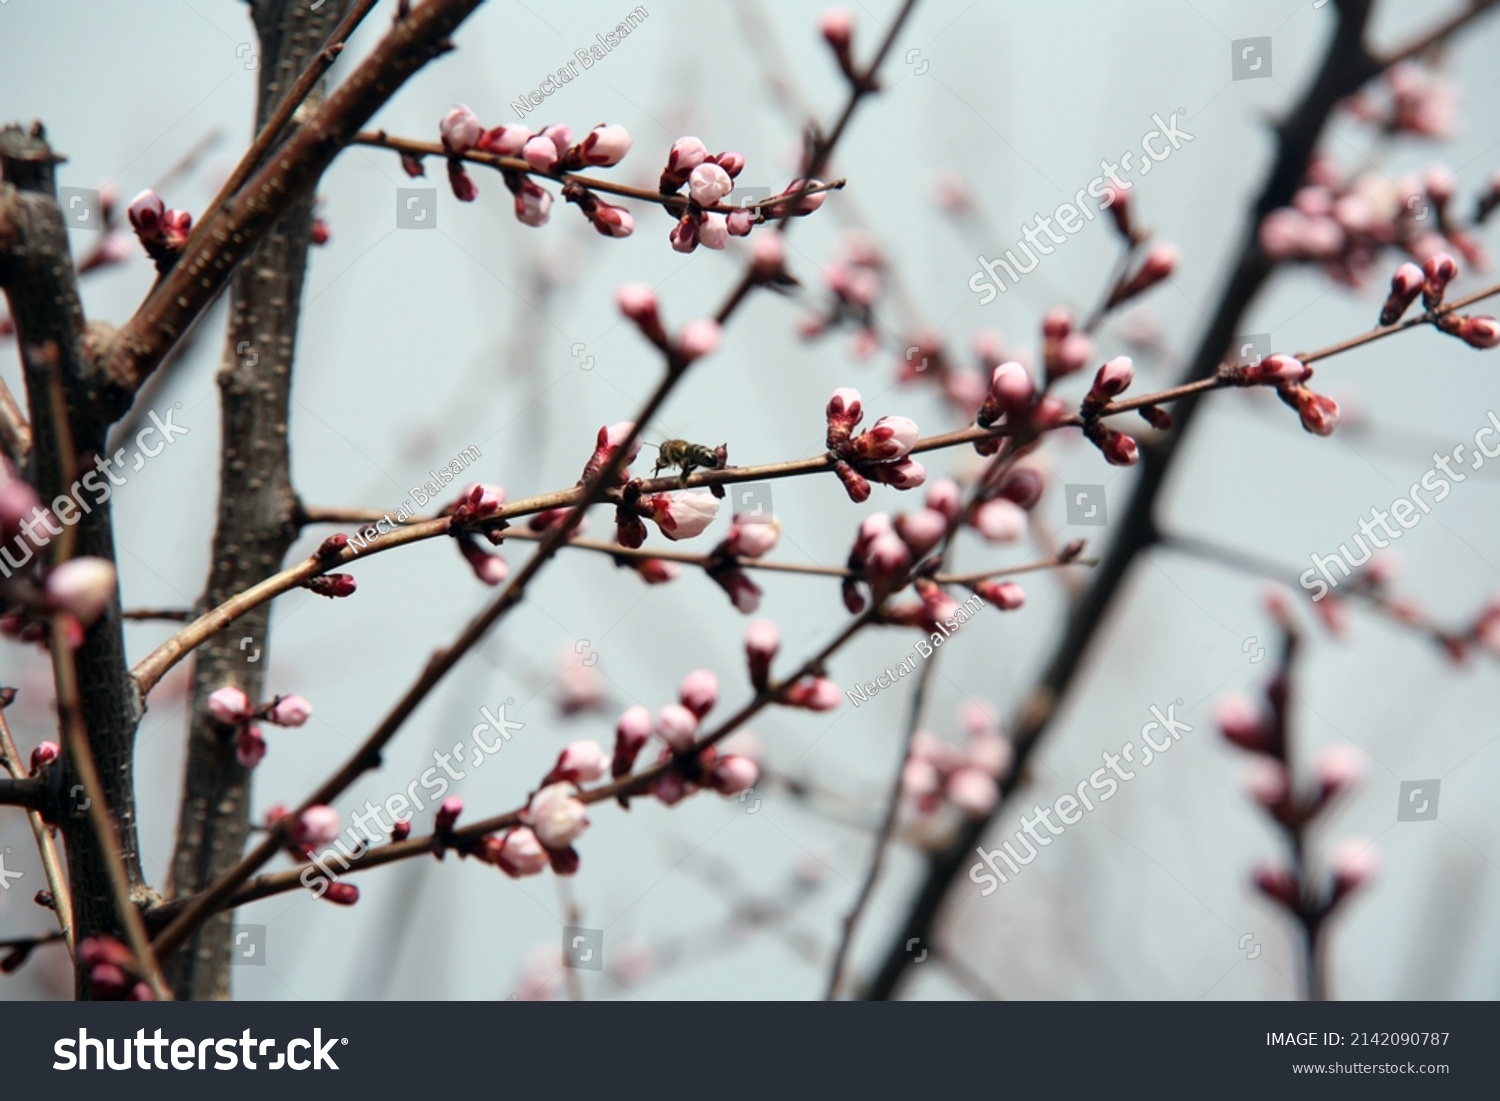 Beautiful blooming apricot tree with flowers in full bloom against blue sky. Bees at work. Concept for Spring. #2142090787